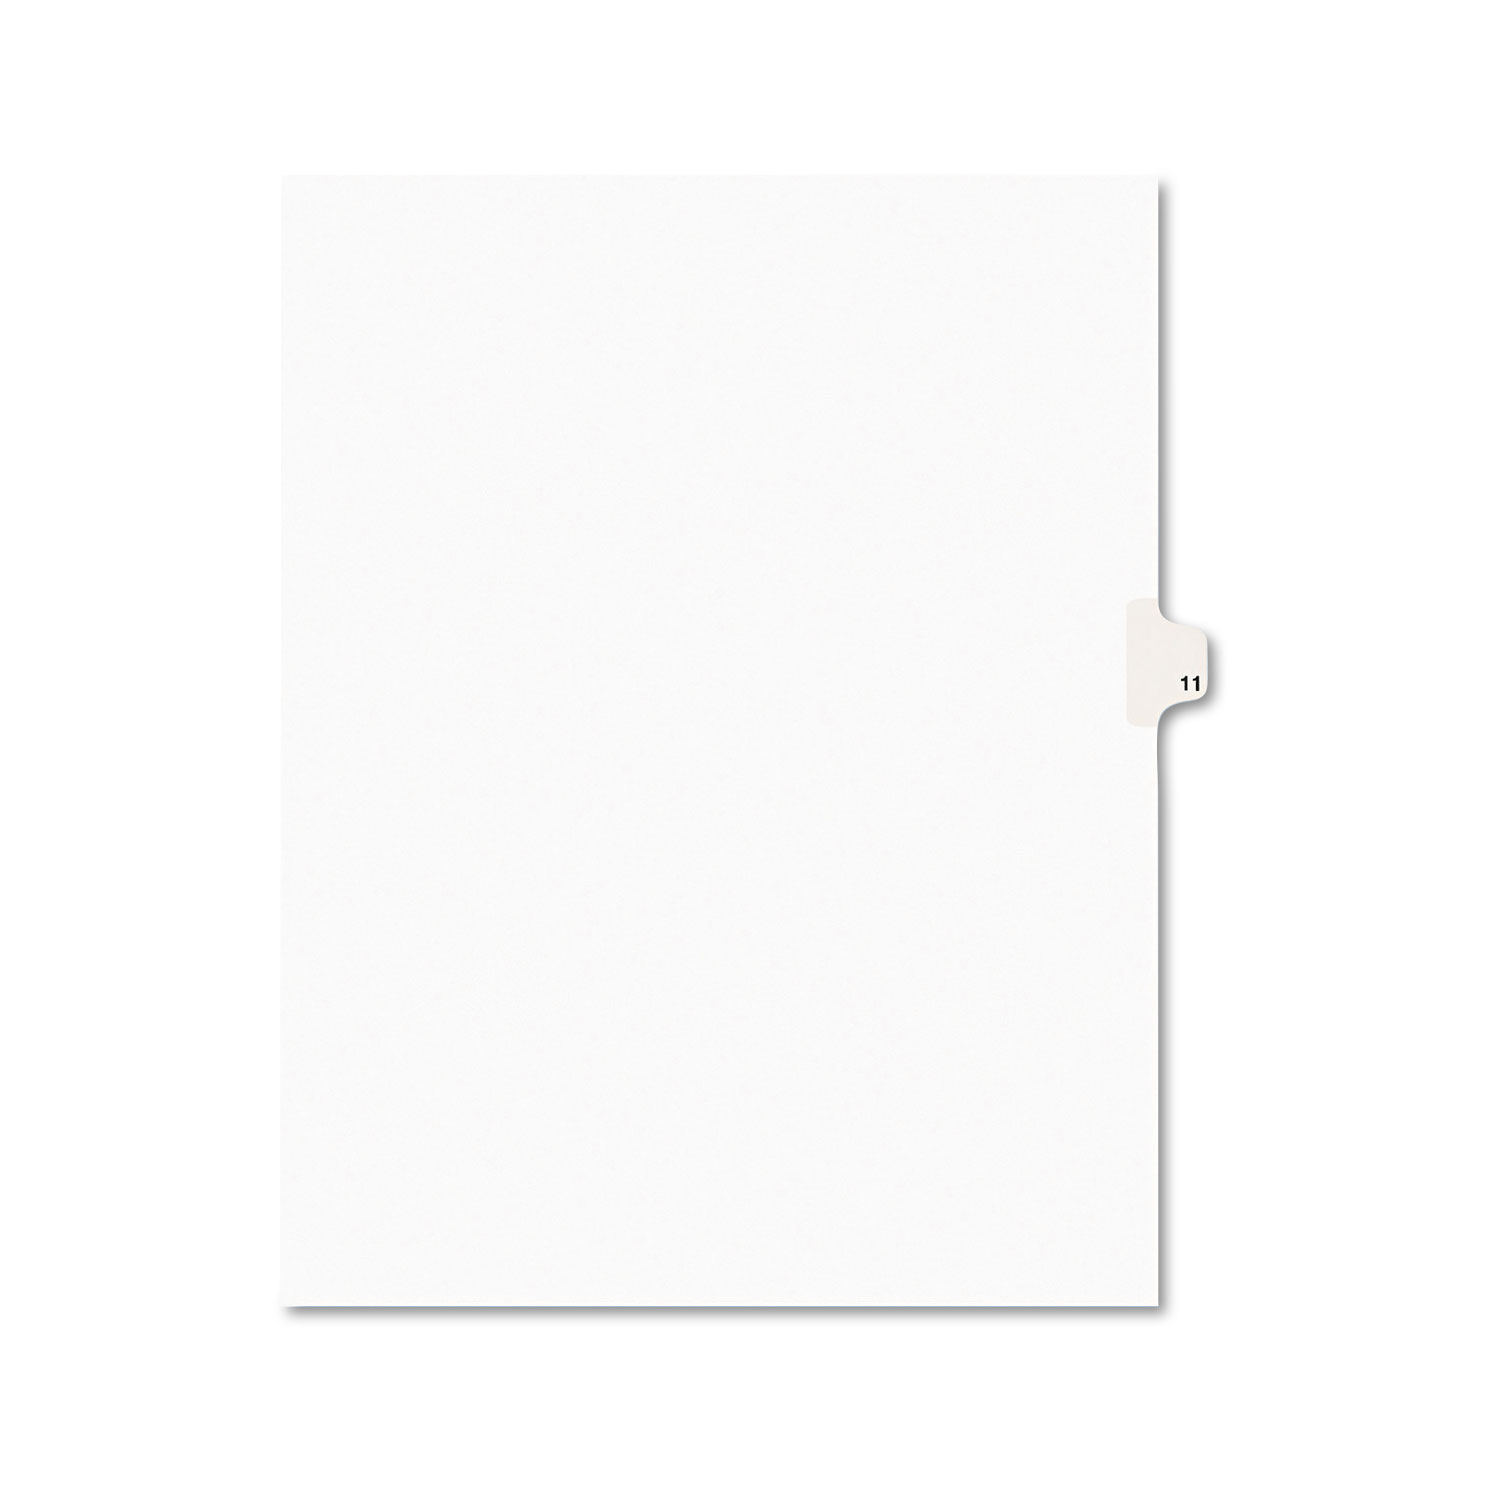  Avery 11921 Preprinted Legal Exhibit Side Tab Index Dividers, Avery Style, 10-Tab, 11, 11 x 8.5, White, 25/Pack (AVE11921) 